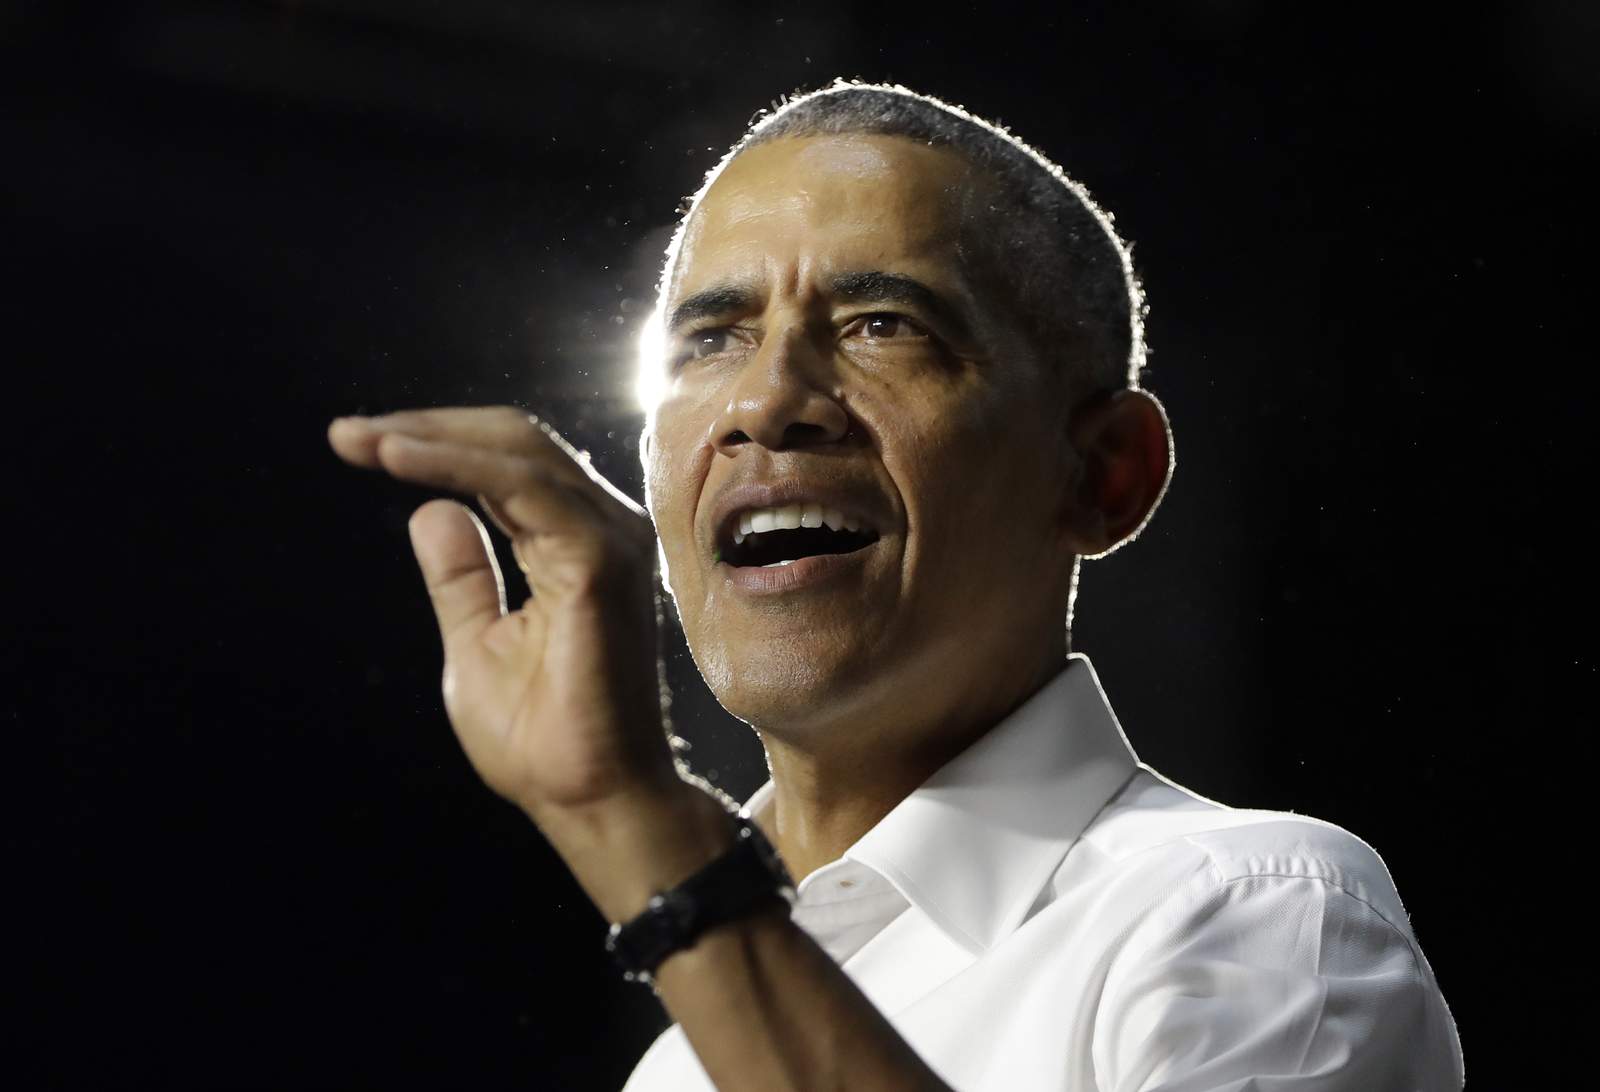 Obama steps out as nation confronts confluence of crises